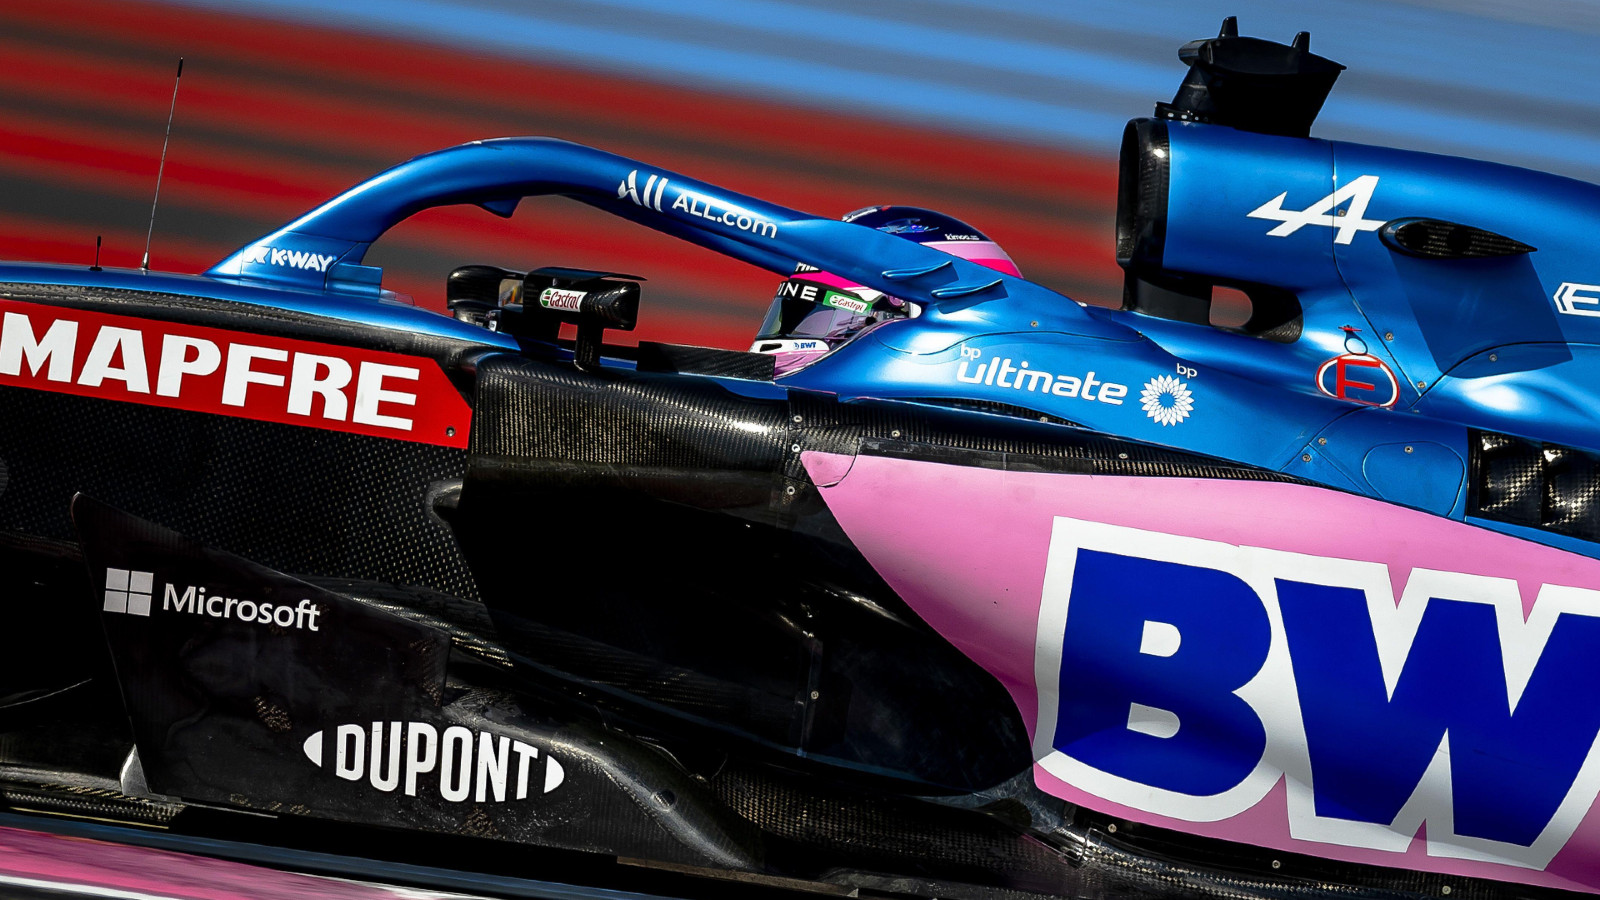 Alpine's Fernando Alonso on track at the French Grand Prix. Paul Ricard, July 2022.